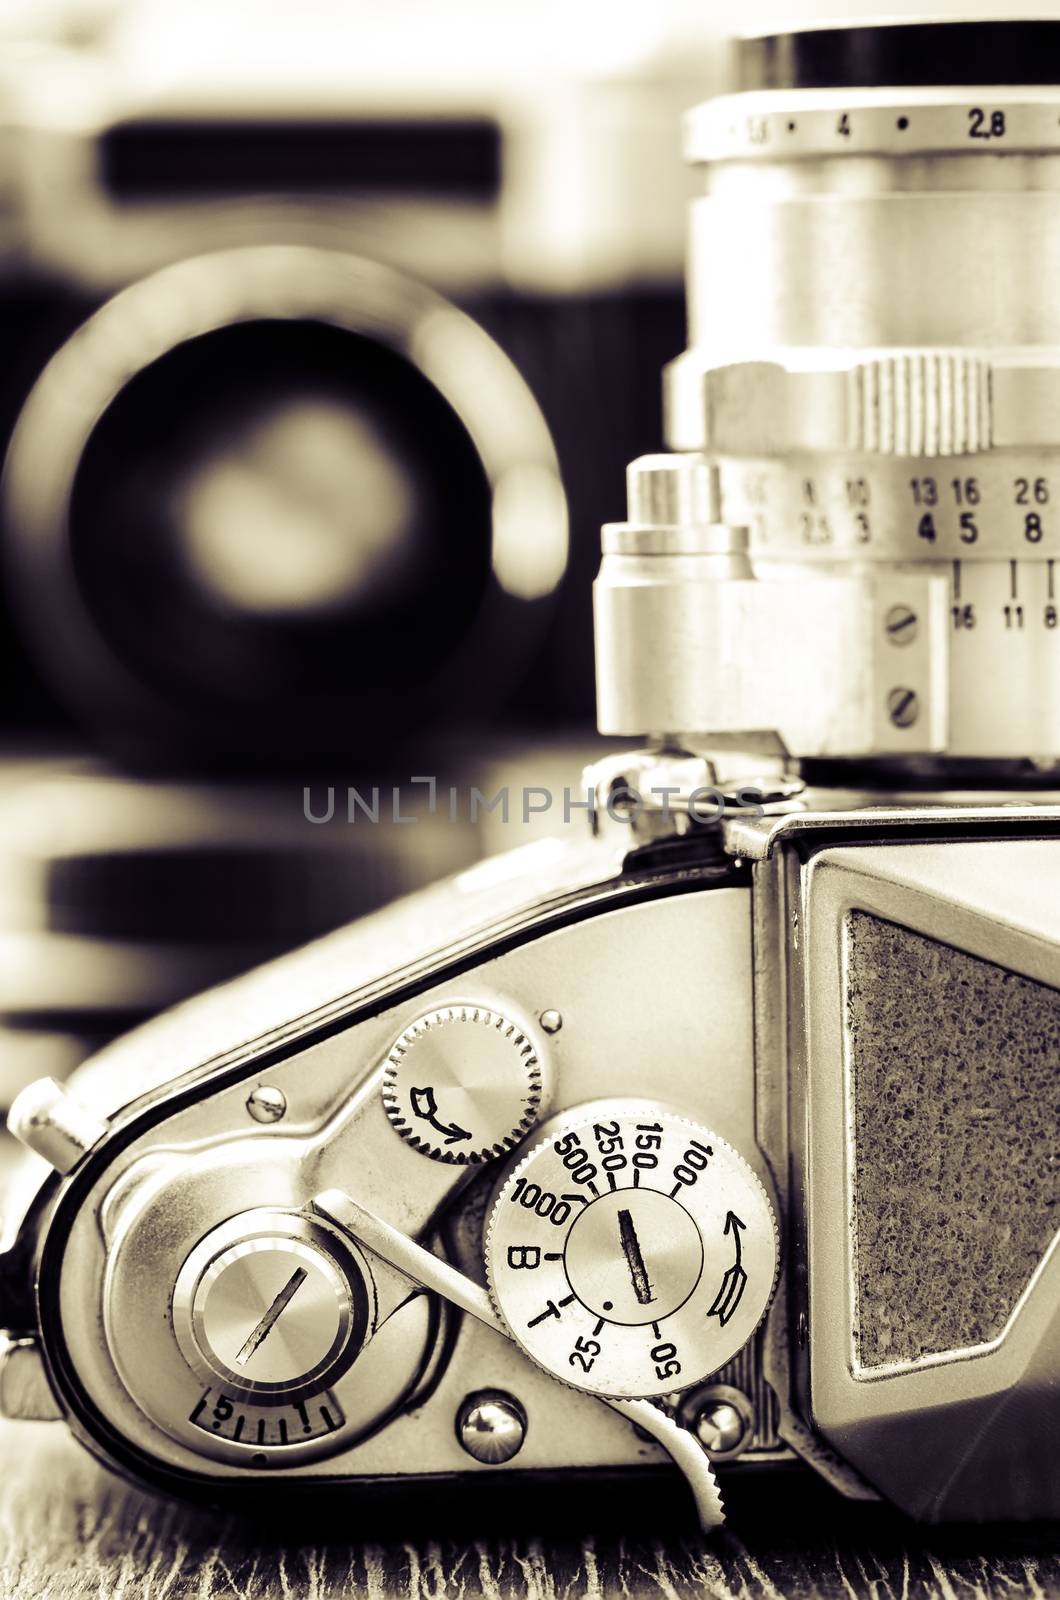 Detail view of classic camera dials with nice bokeh background in vintage style